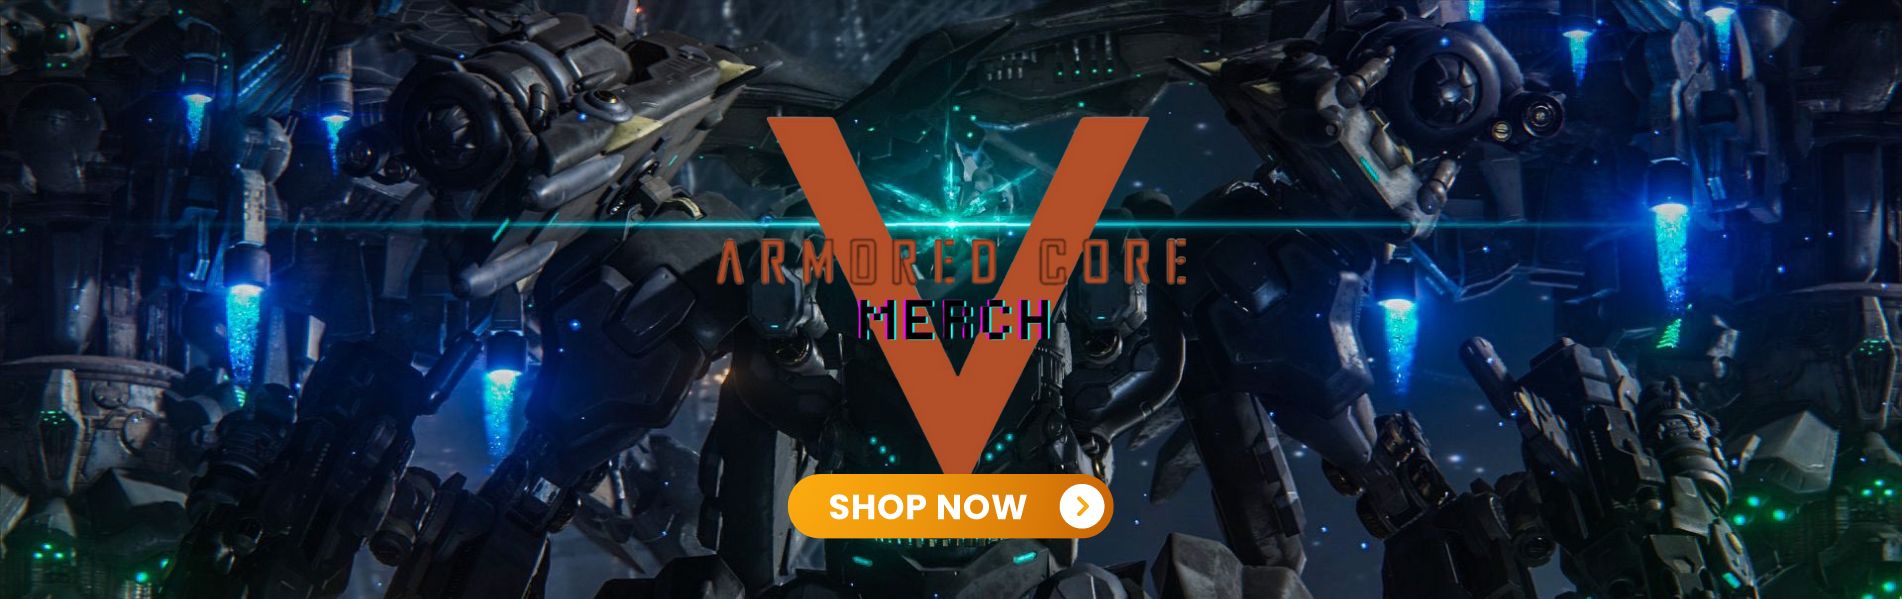 Armored Core banner 1